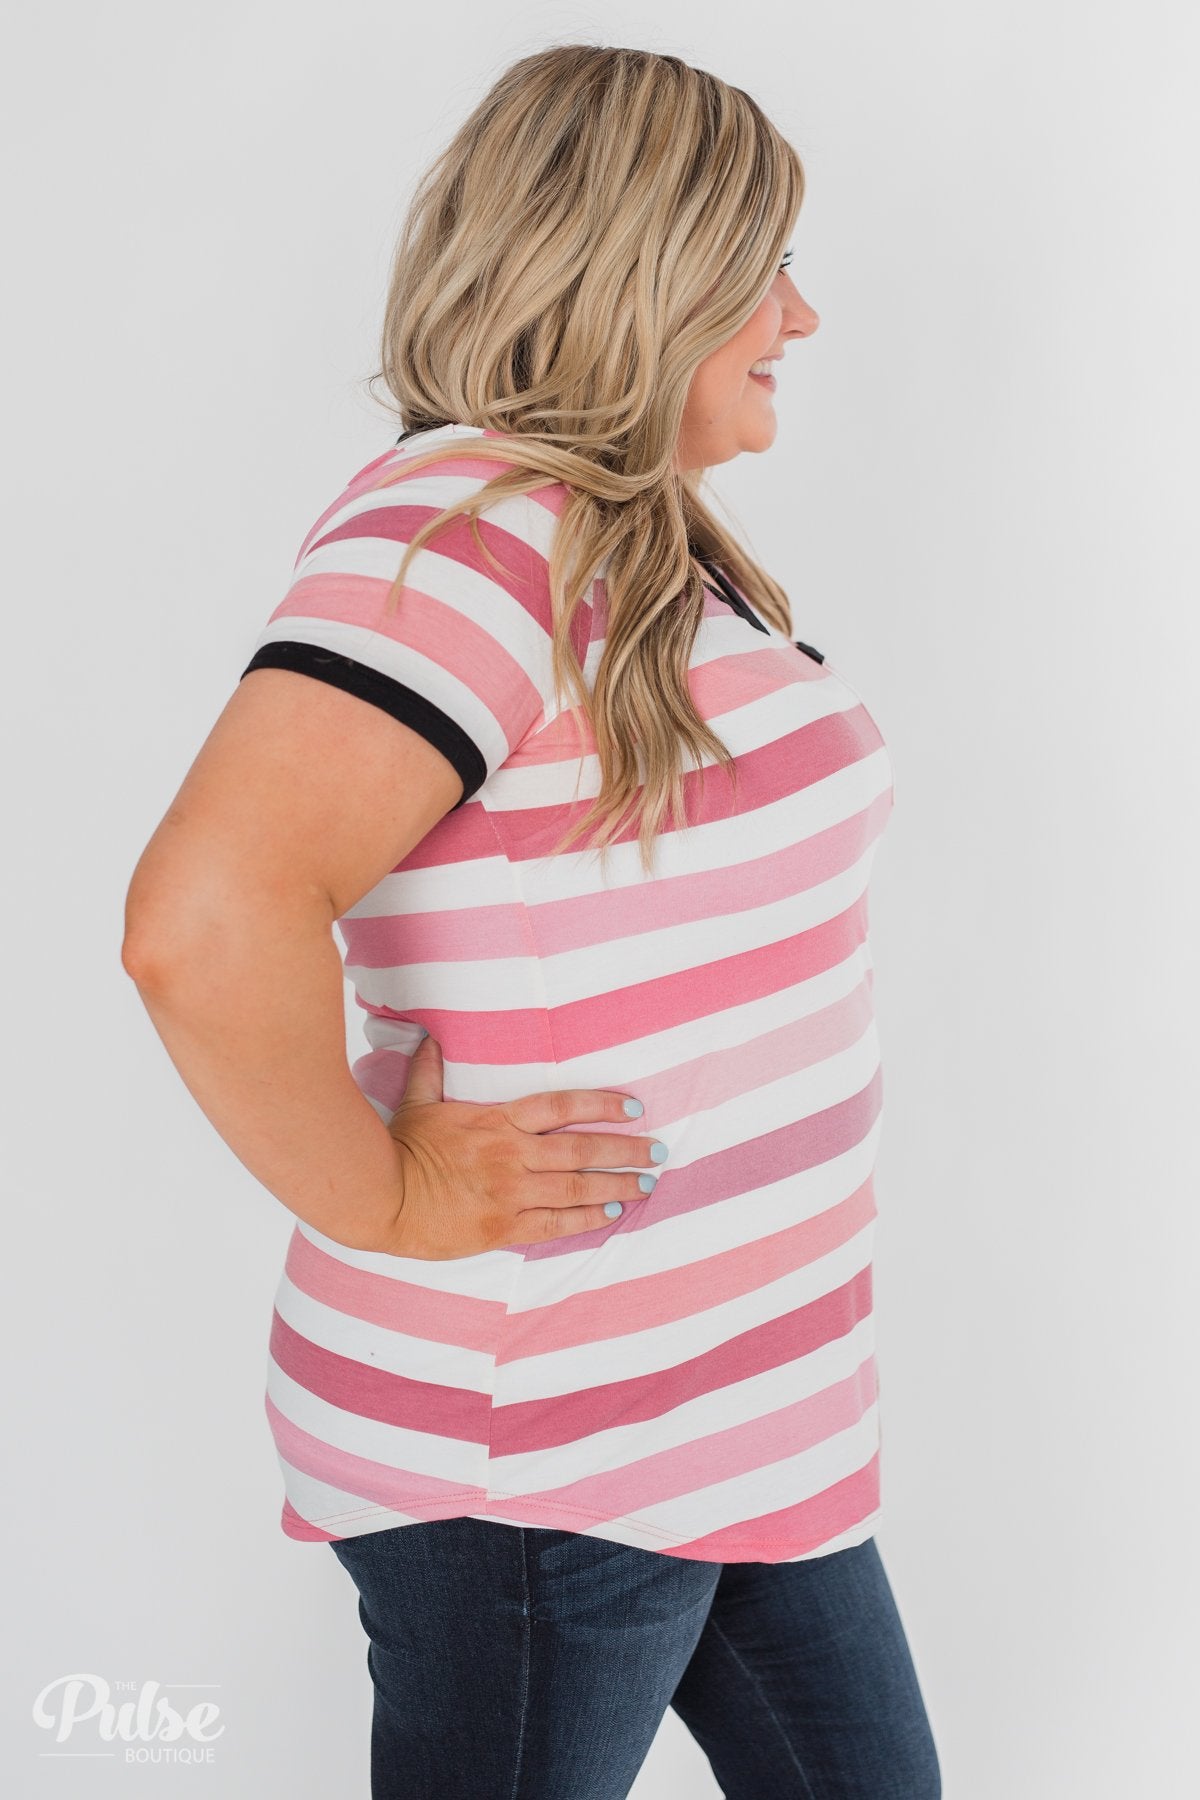 Lessons In Love Striped Pocket Top- Shades of Pink